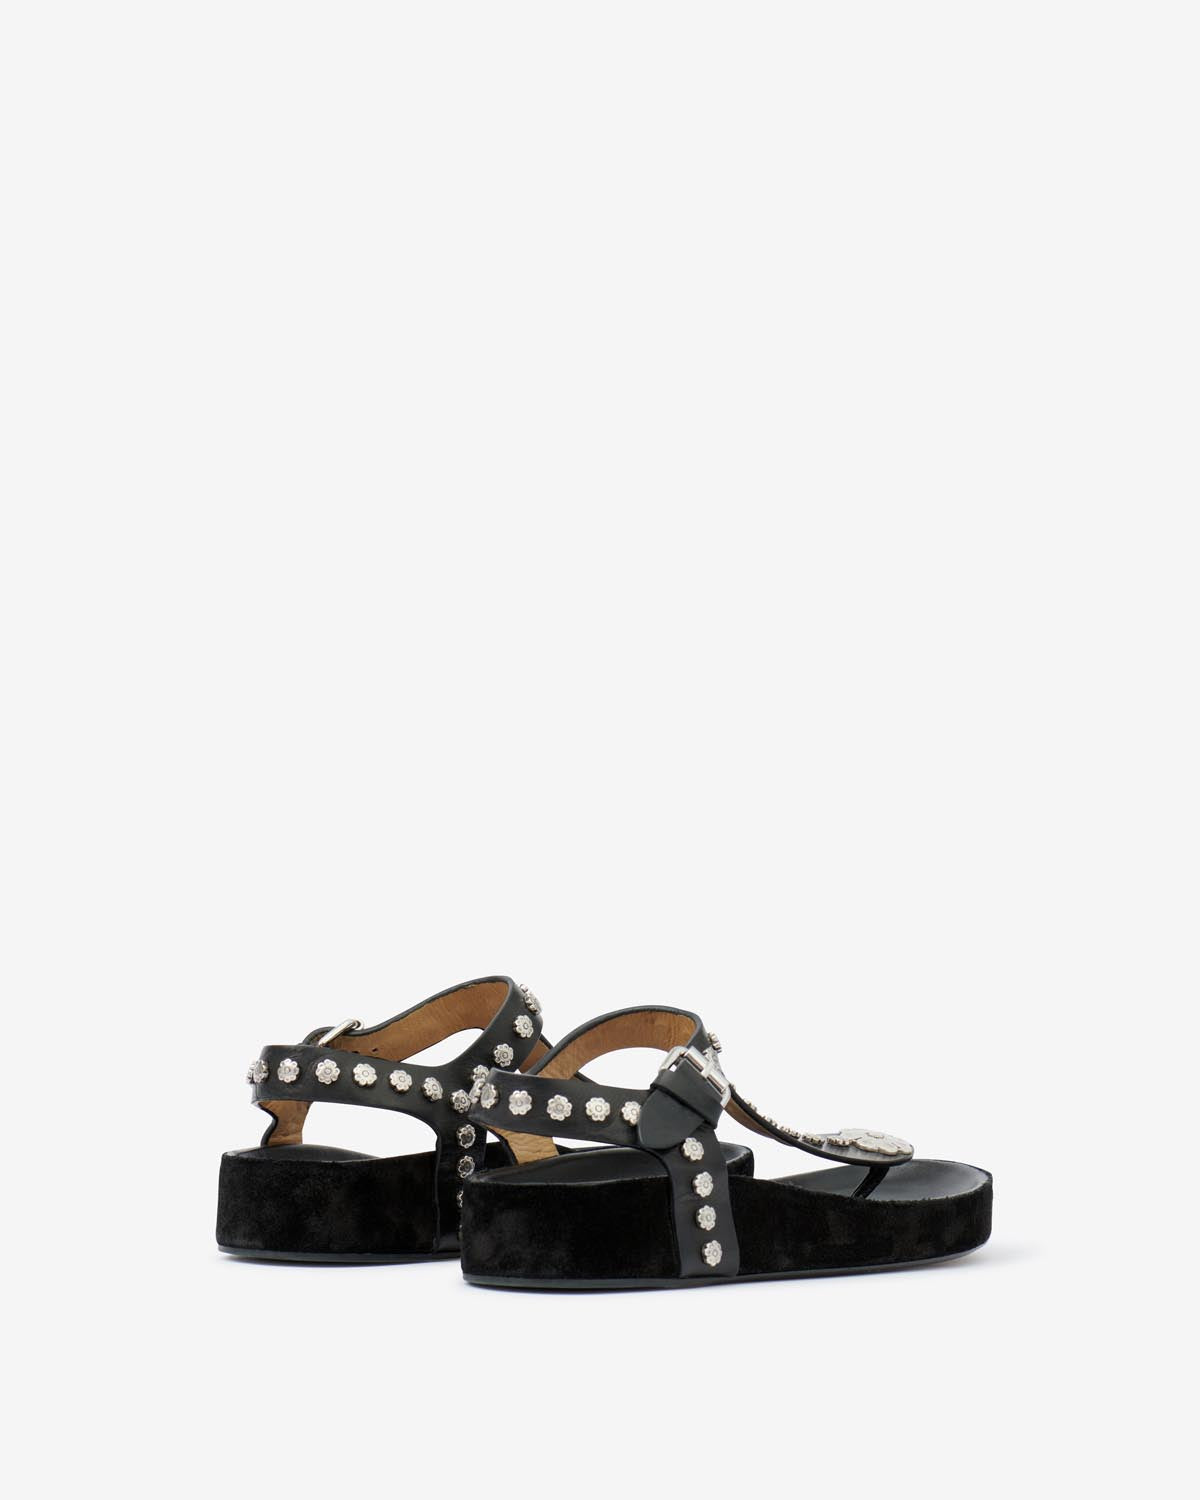 Enore sandals Woman Black and silver 3